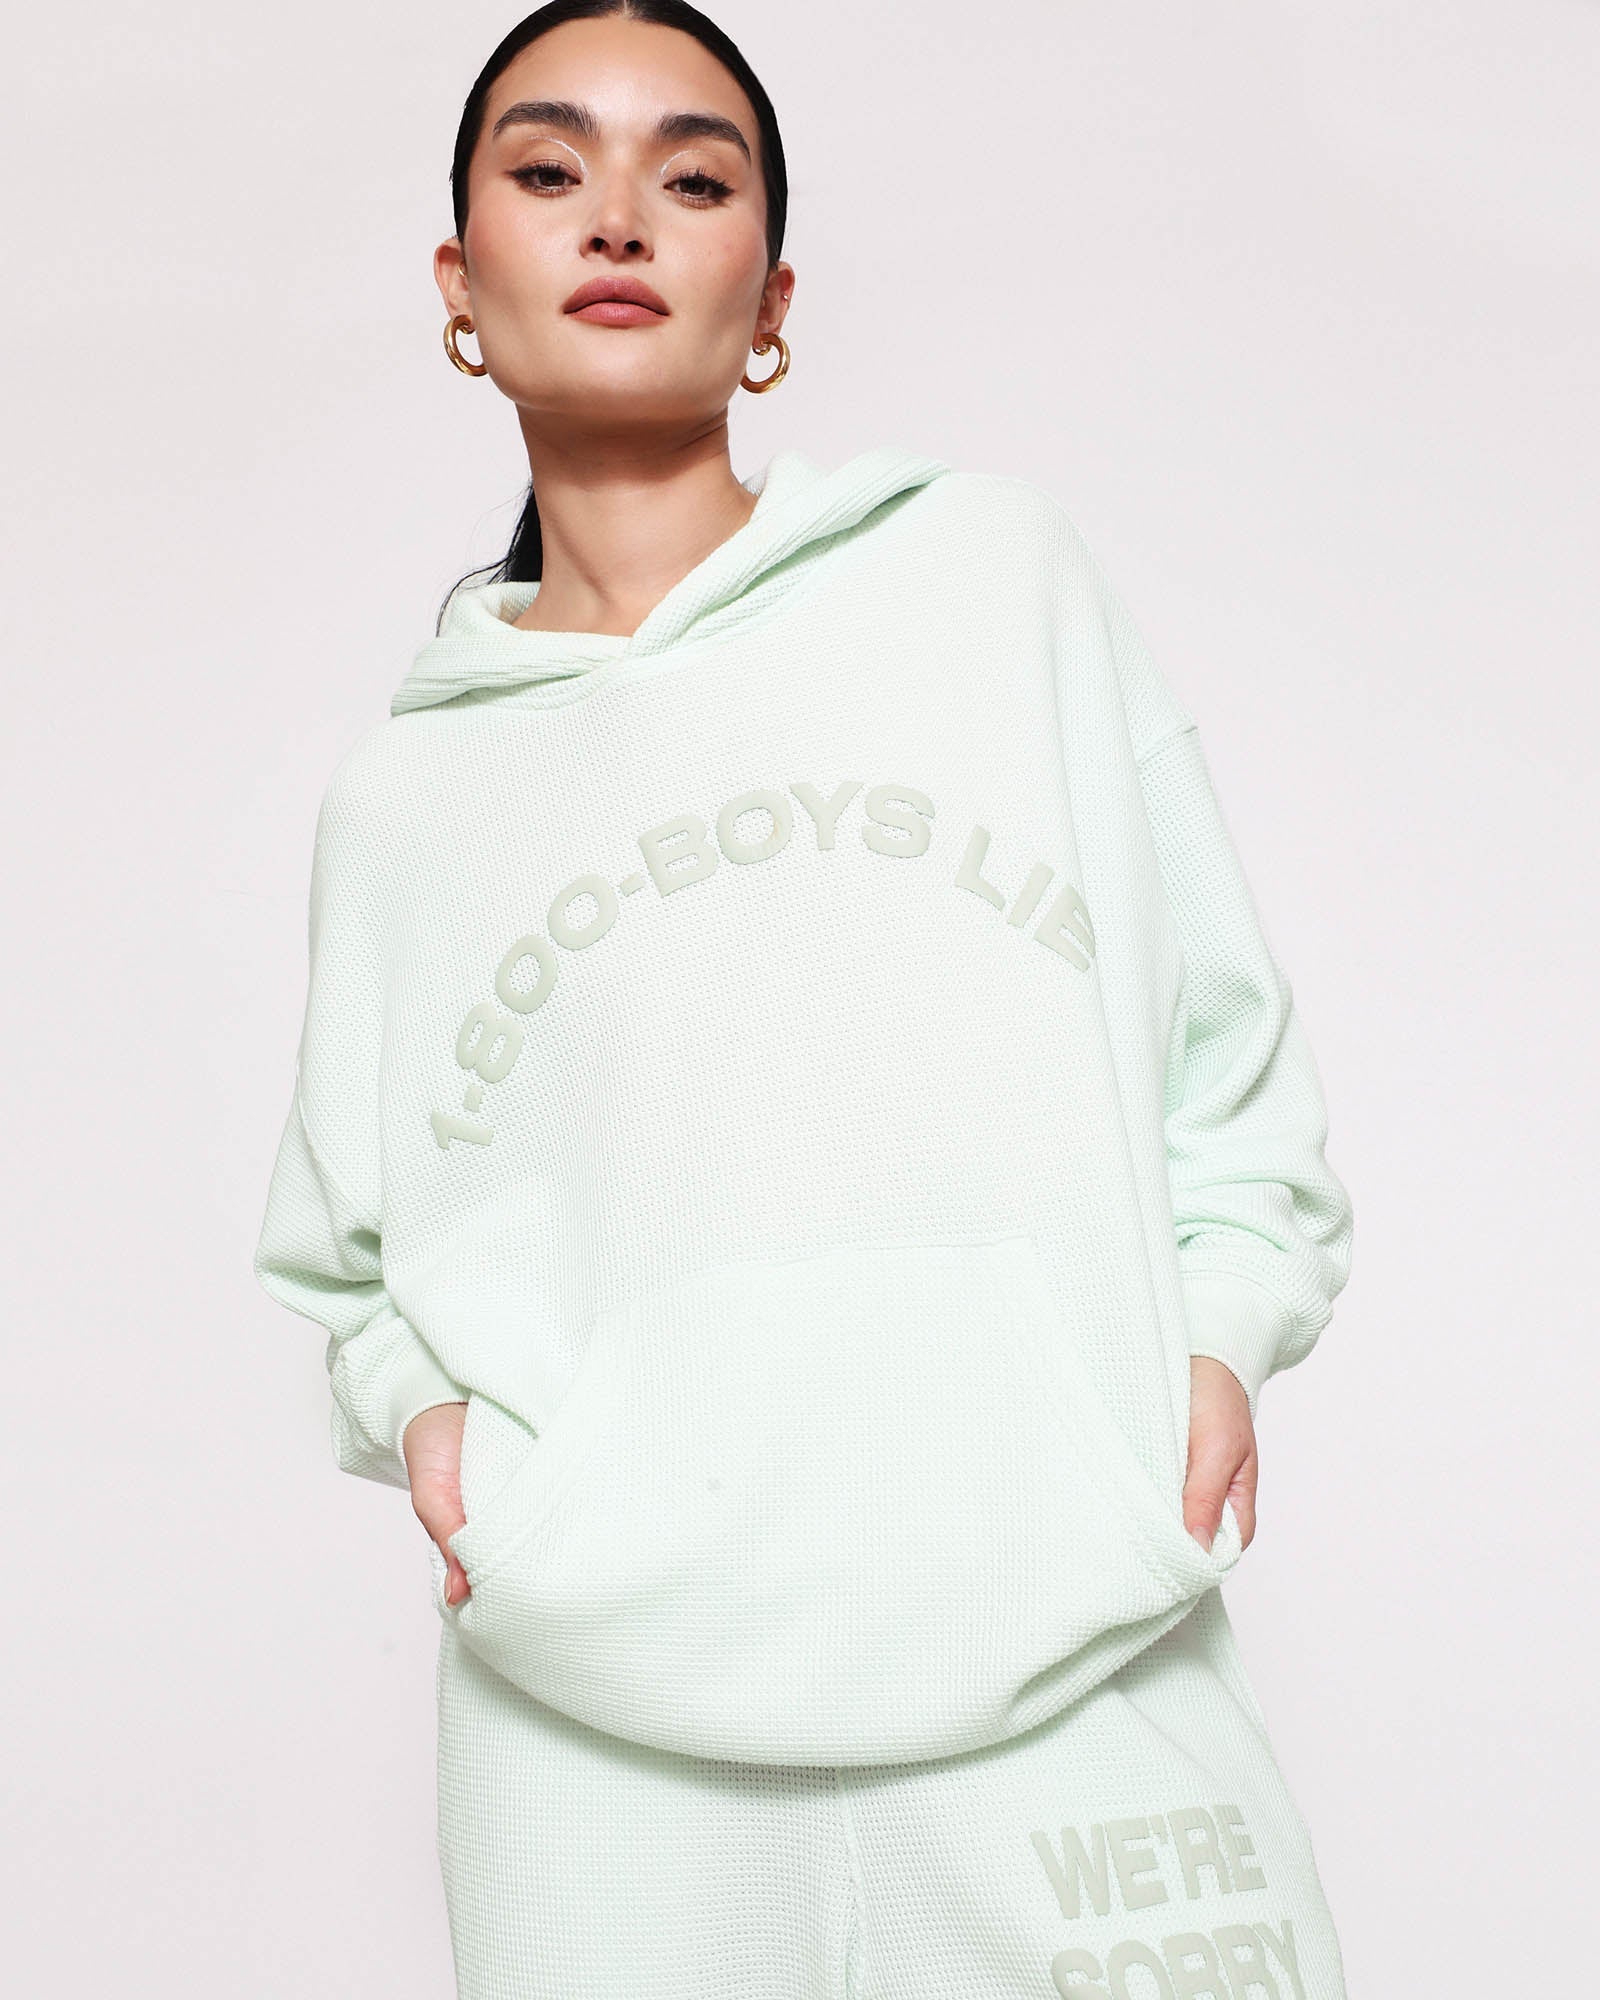 GREEN 1-800 REUNION HOODIE - ONFEMME By Lindsey's Kloset